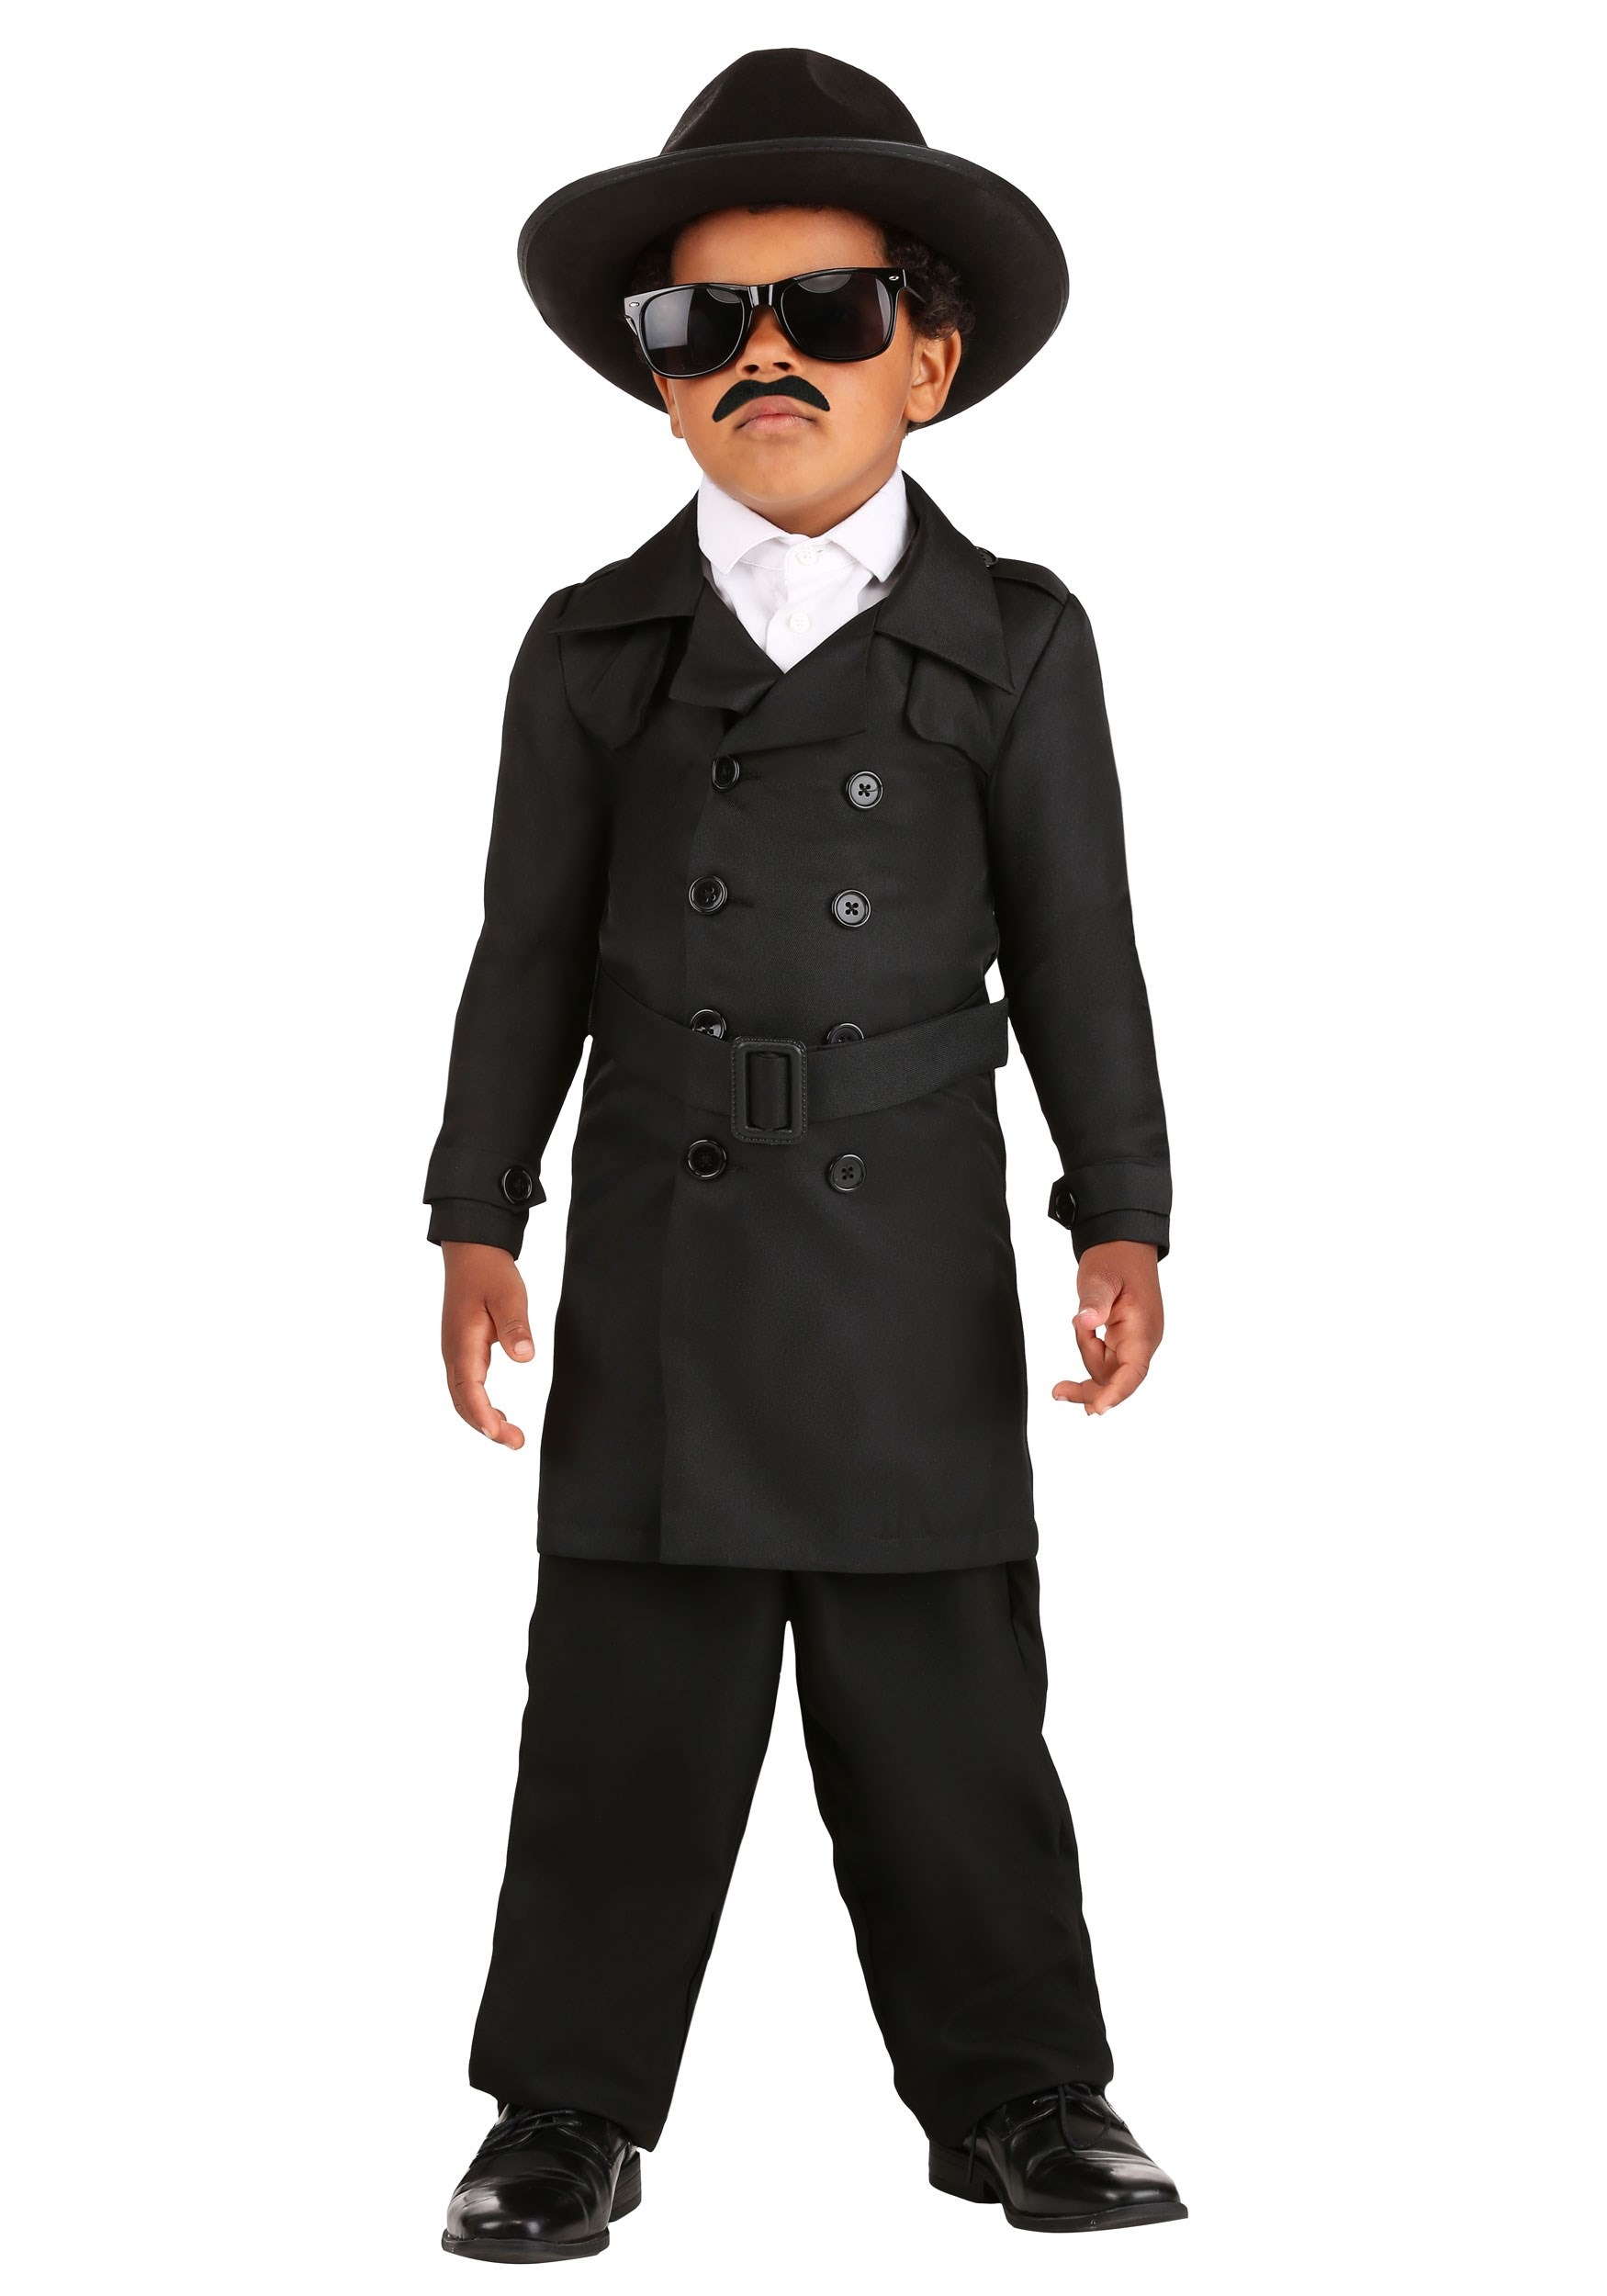 Secret Agent Man Costume for Toddlers